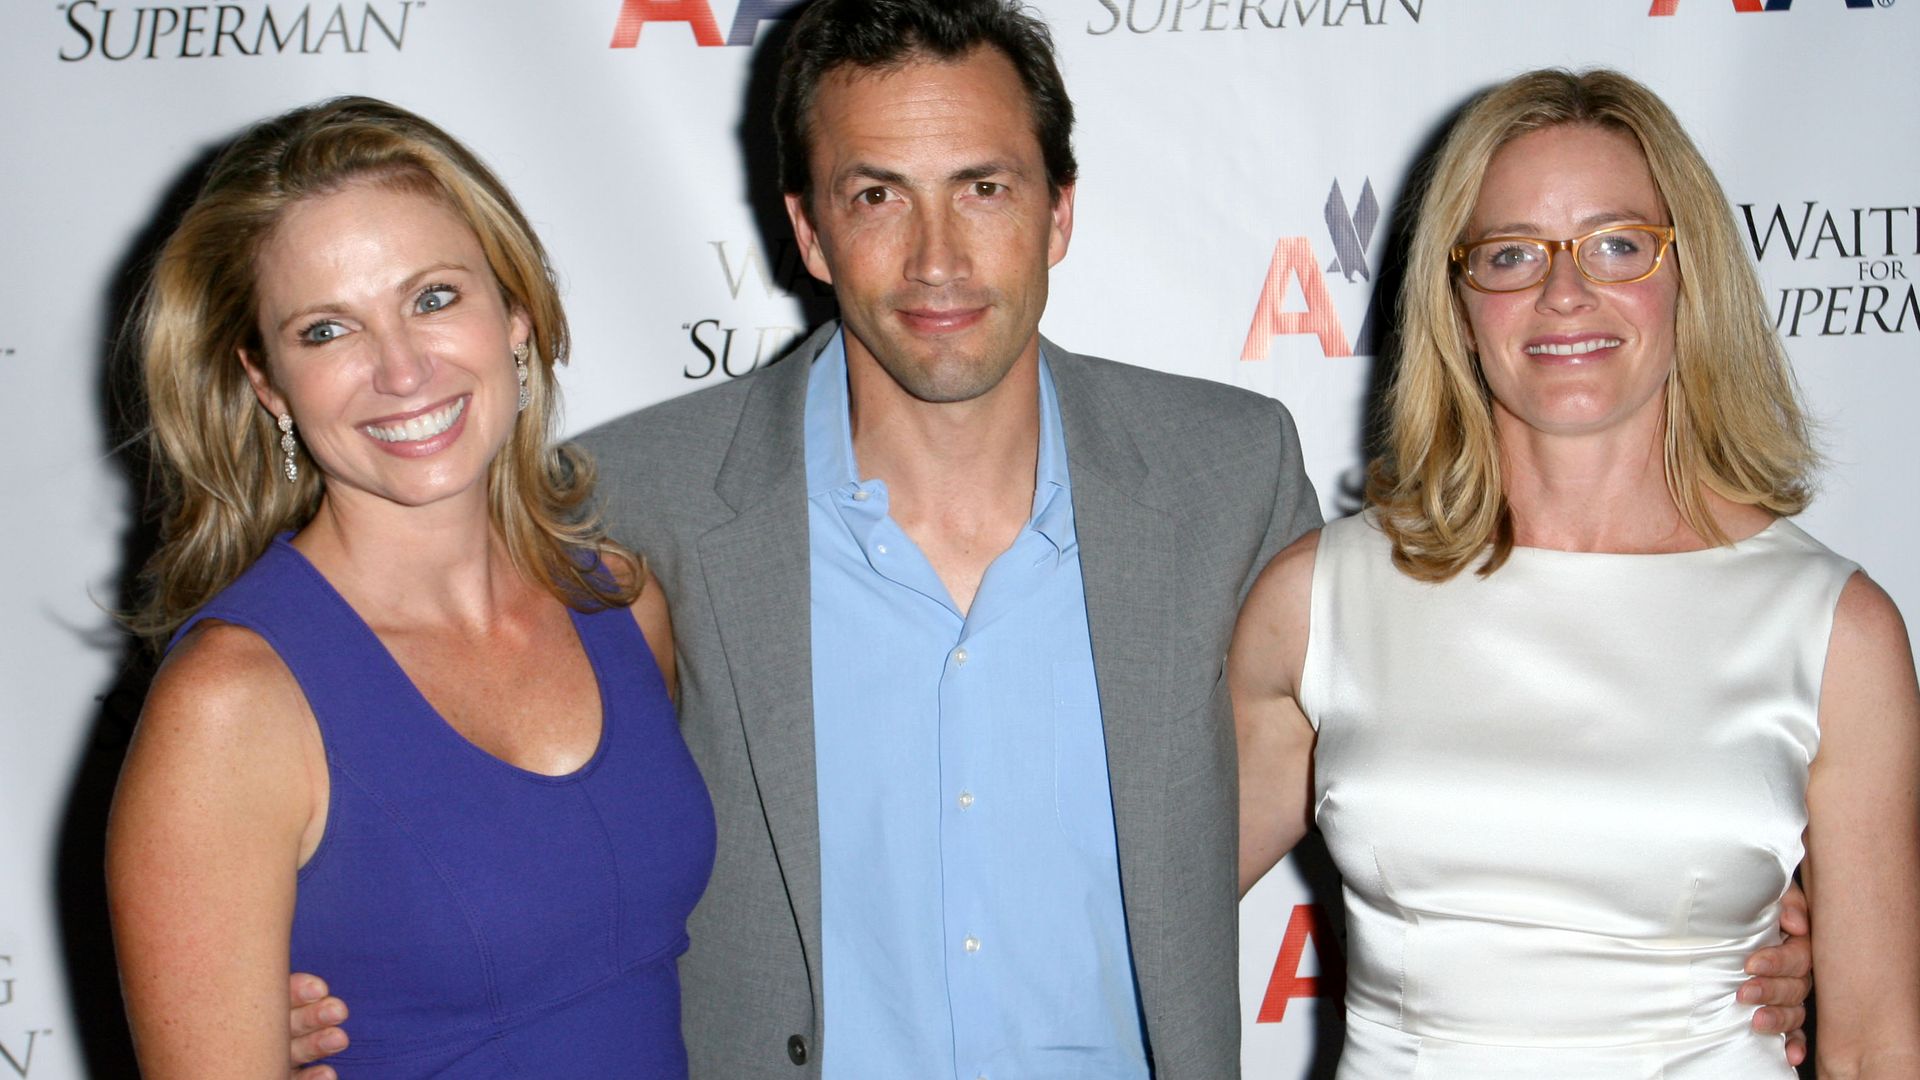 Elisabeth Shue with brother Andrew Shue and her ex sister-in-law Amy Robach